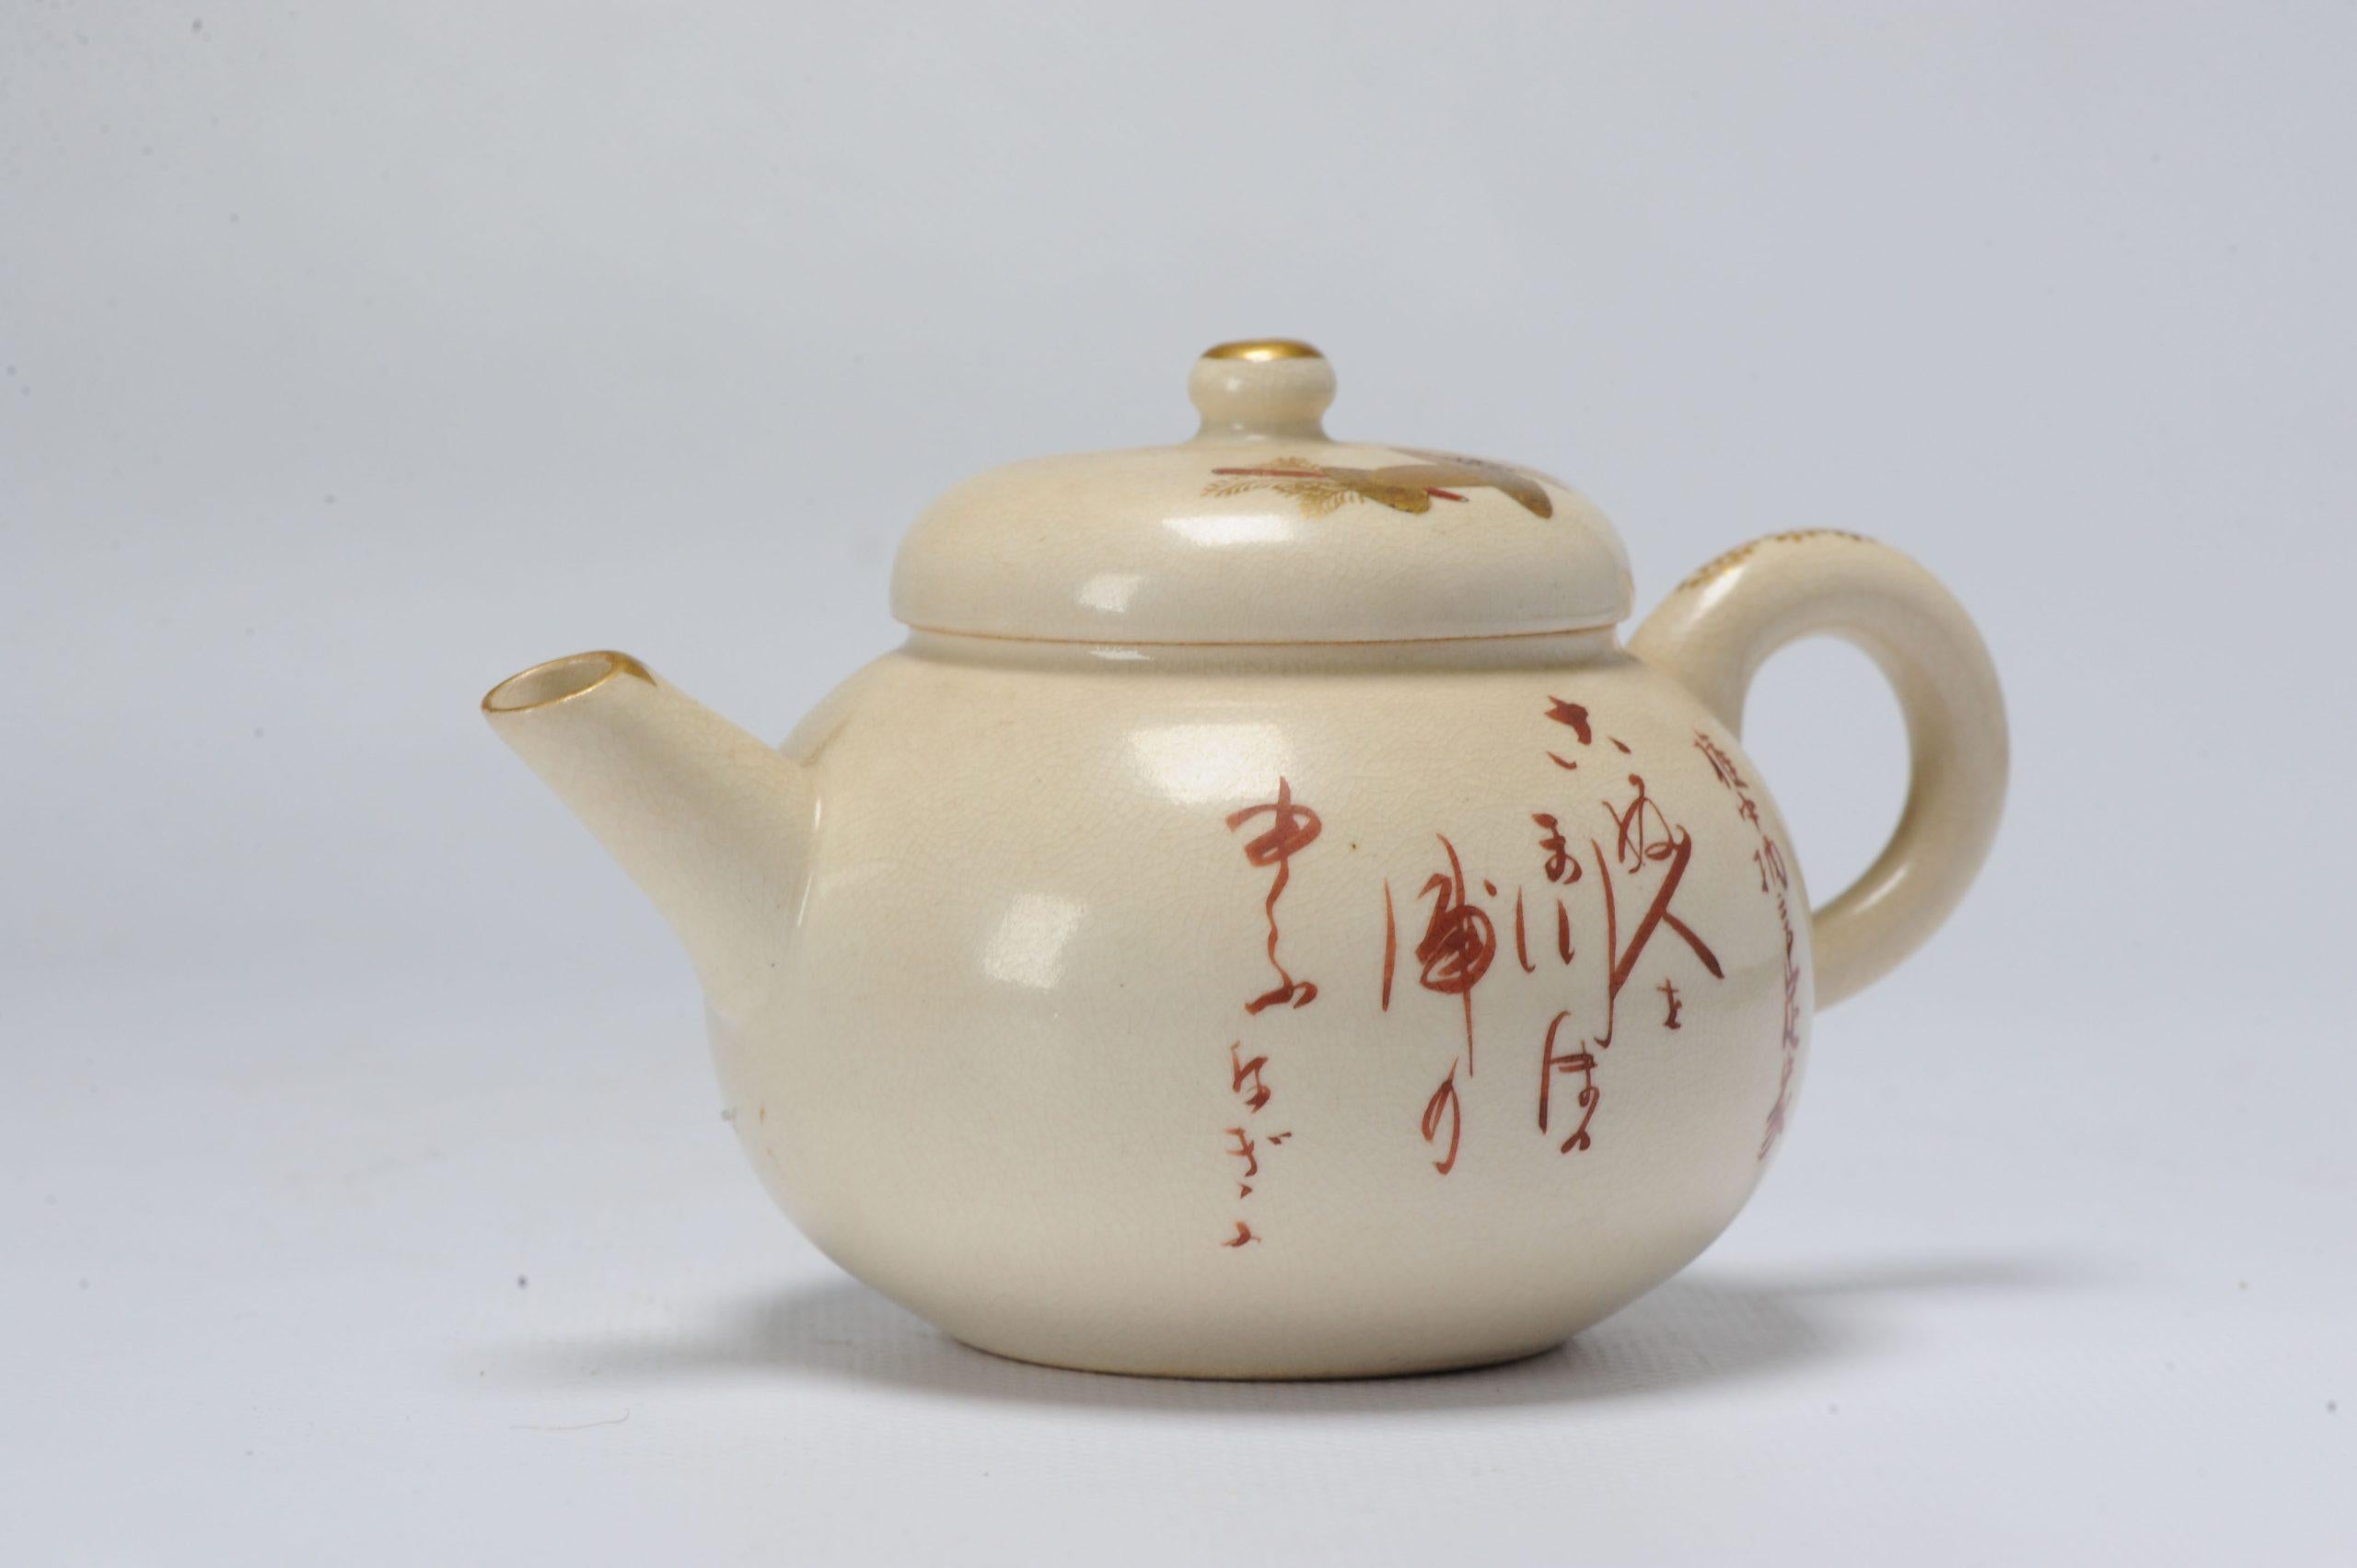 A lovely Satsuma Teapot. Marked on body and lid + pot rims. So, the teapot depicts the author Fujiwara no Teika (the text to the right reads, 